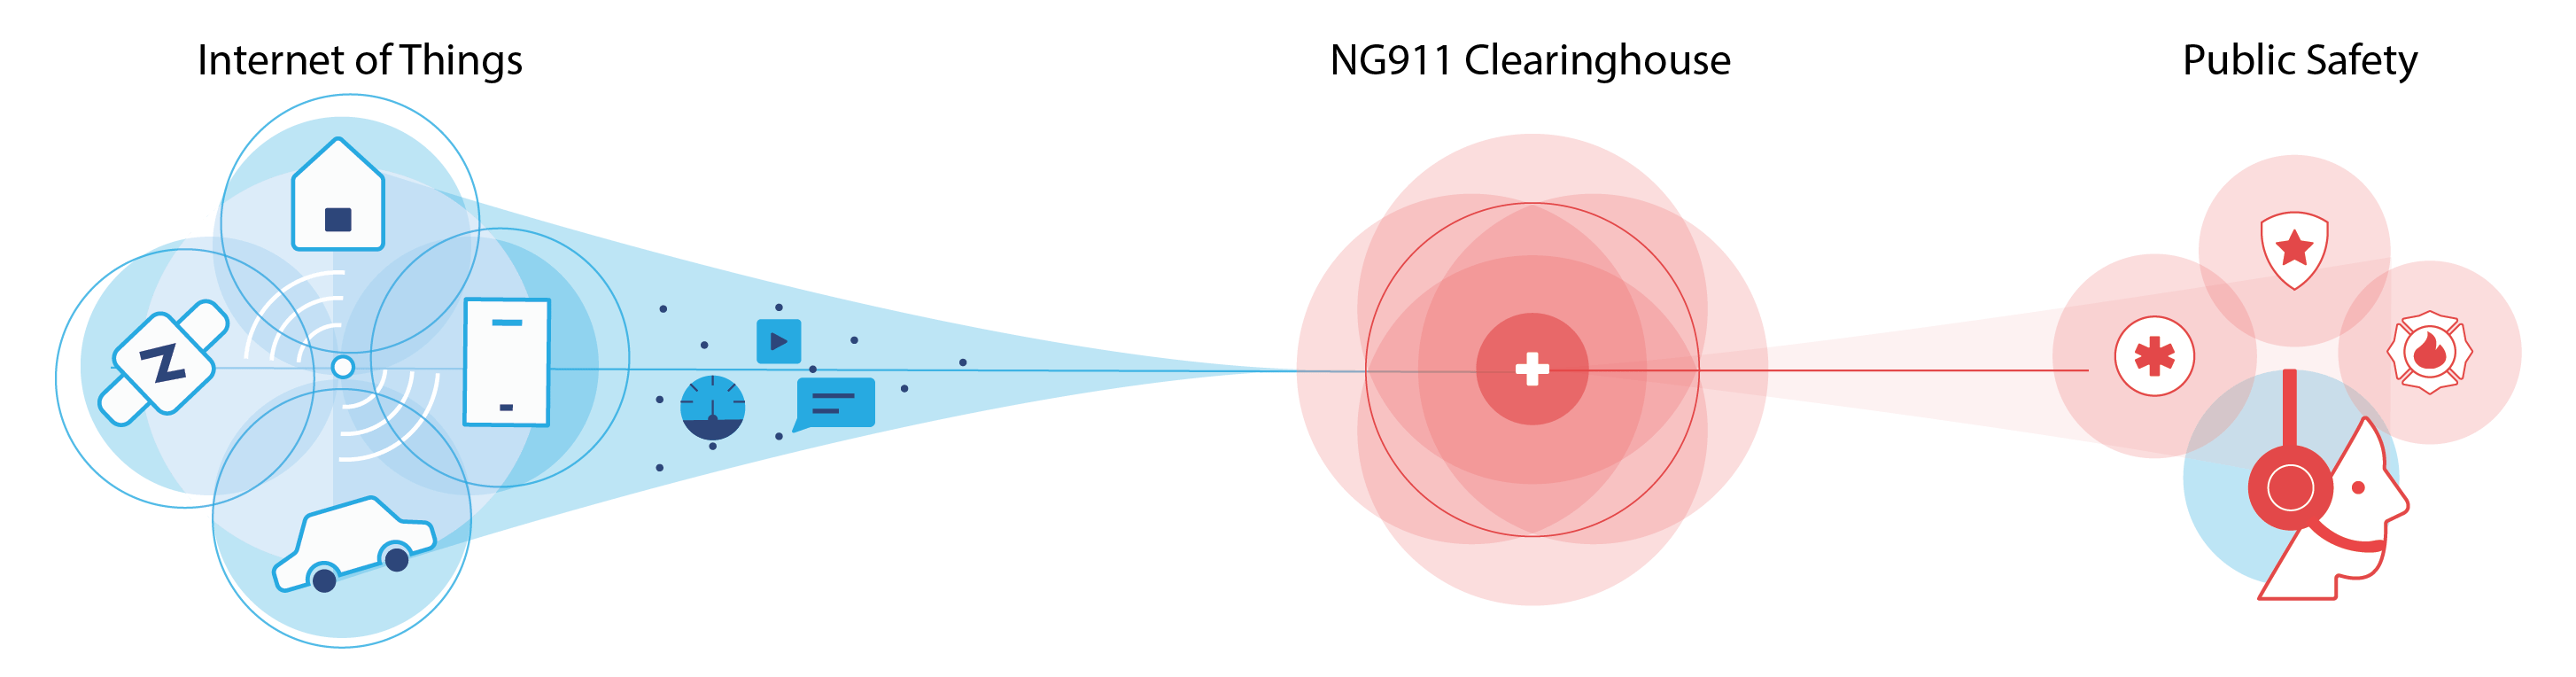 NG911 Clearinghouse